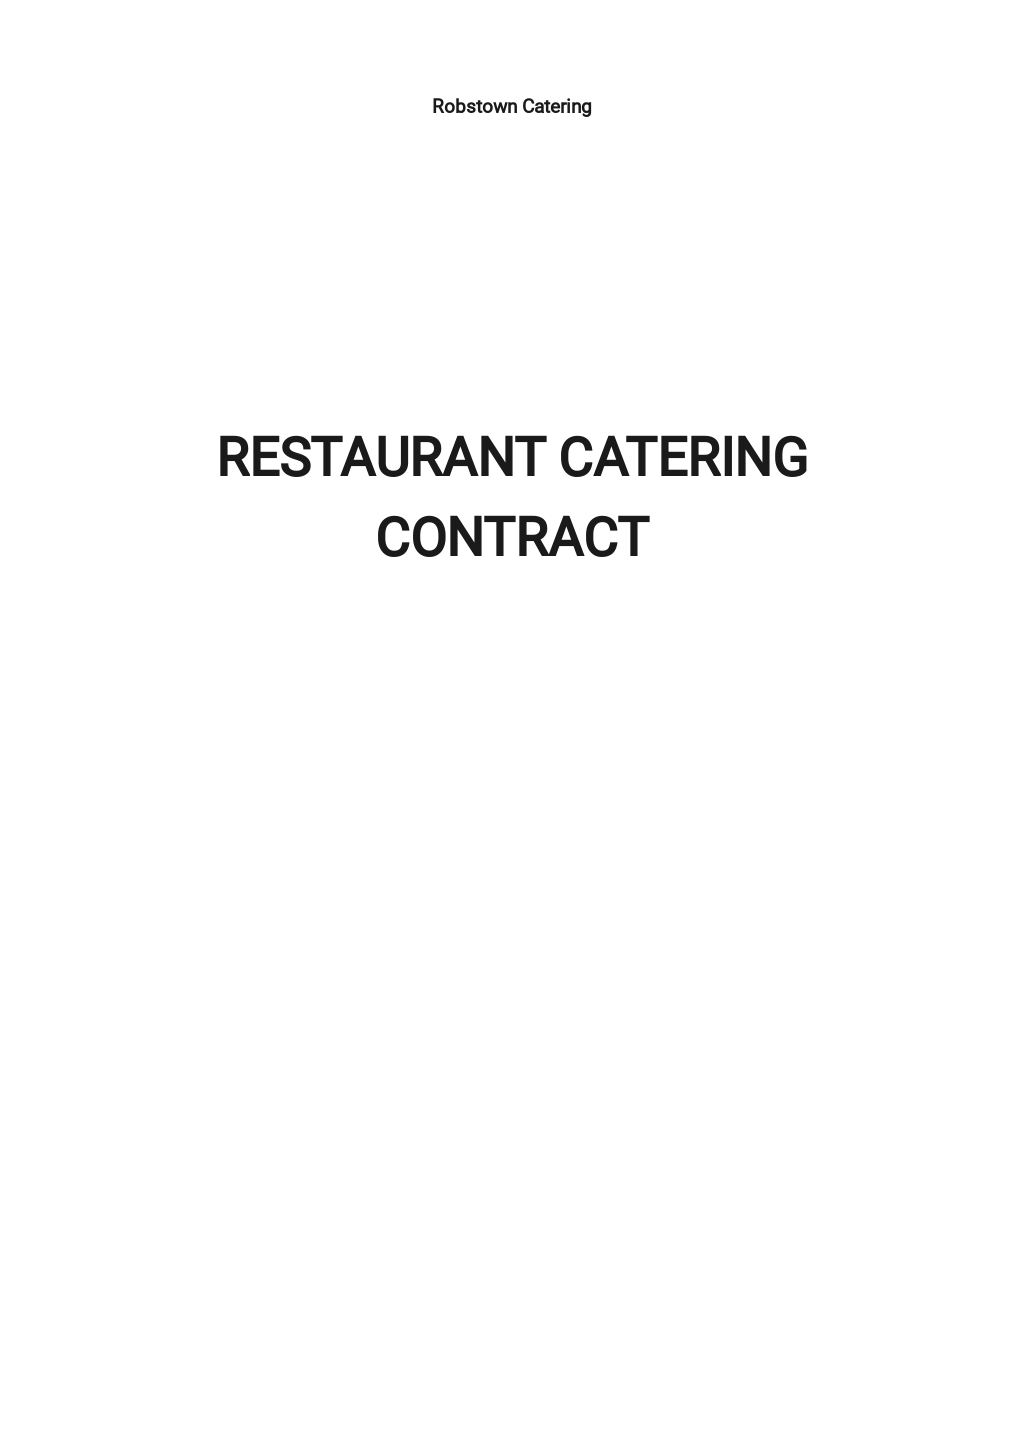 Restaurant Catering Contract Template.jpe